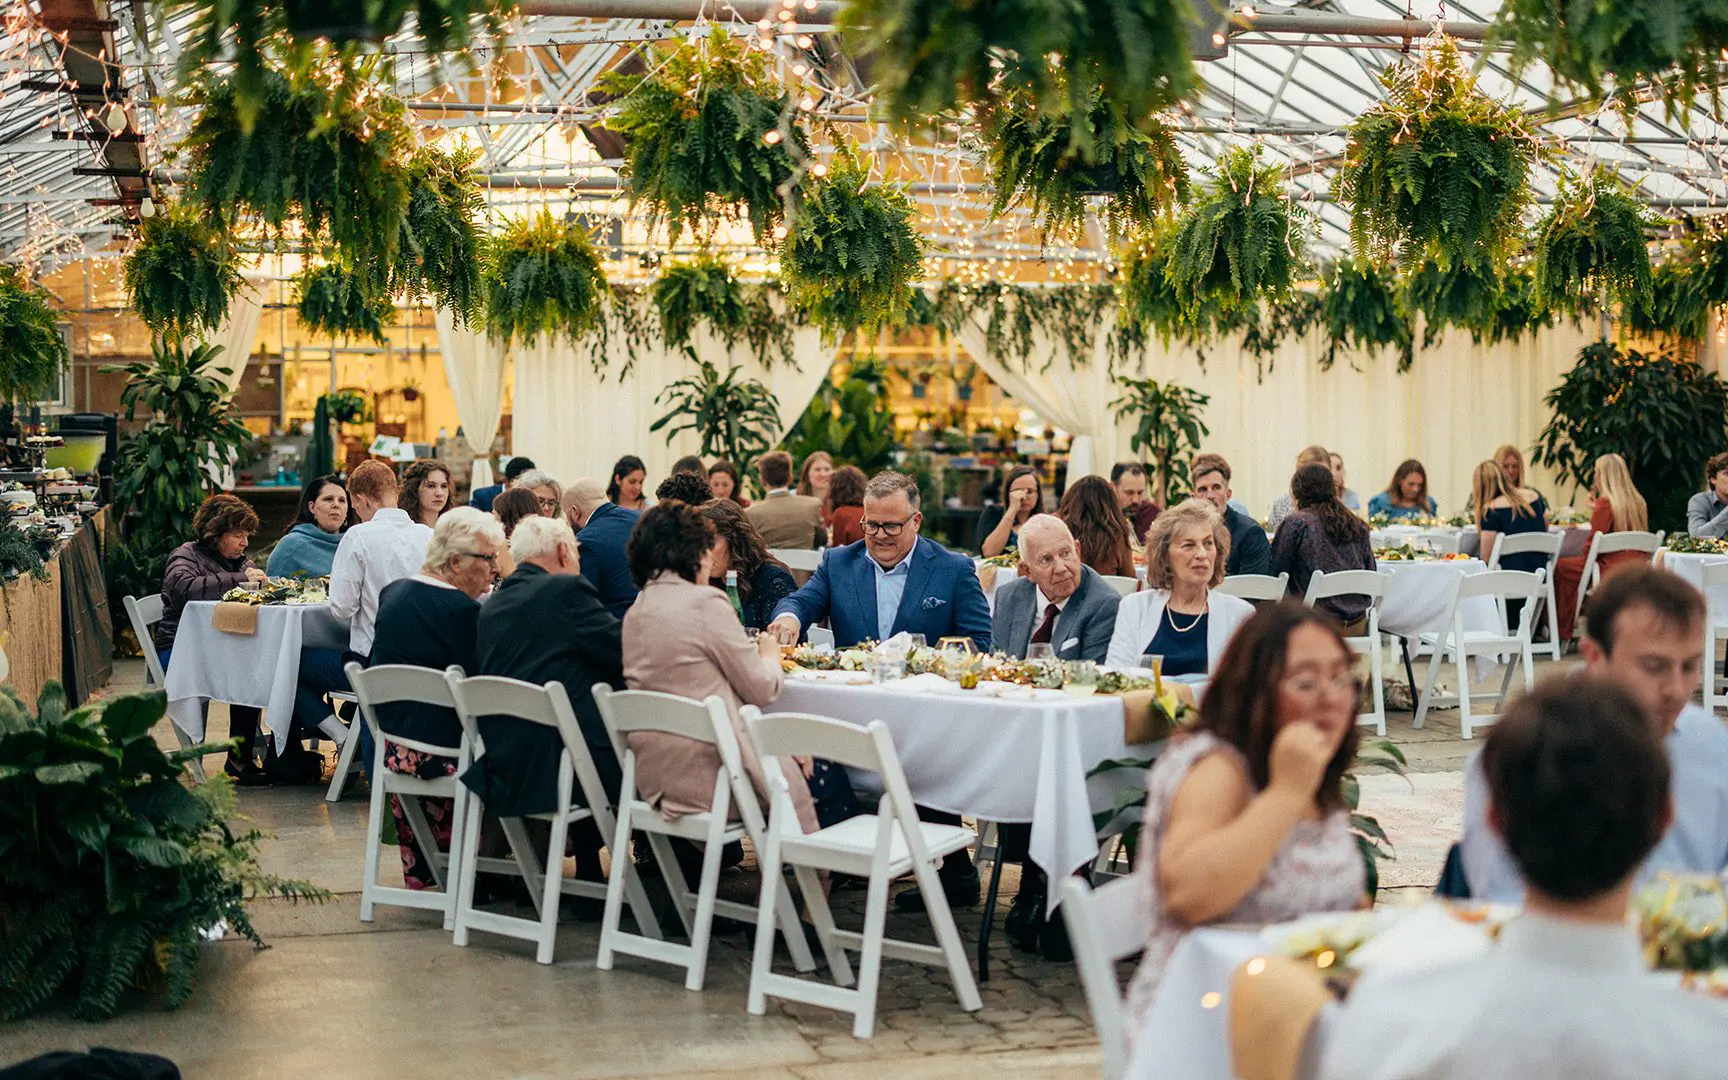 Guests seated at tables in a greenhouse adorned with hanging plants during a formal event.